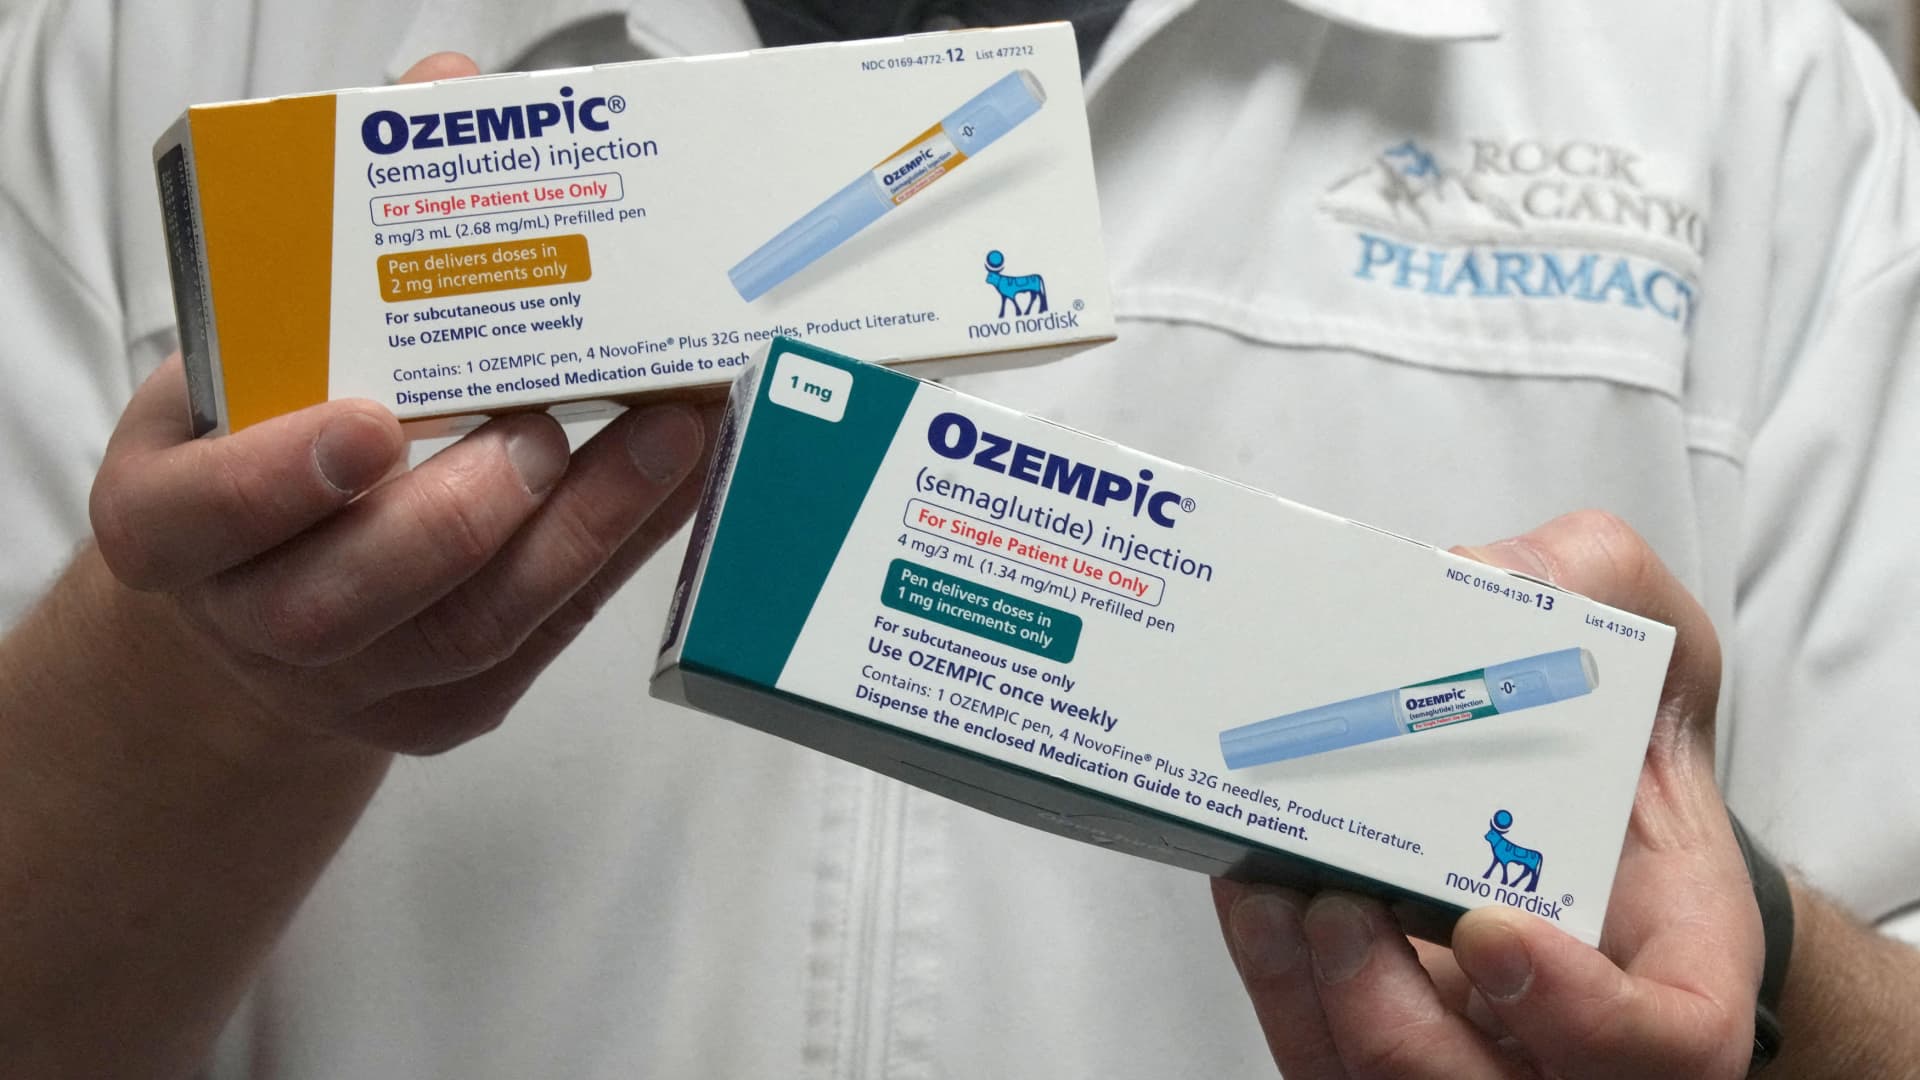 Ozempic could be the next target of Medicare drug price negotiations - here's why 